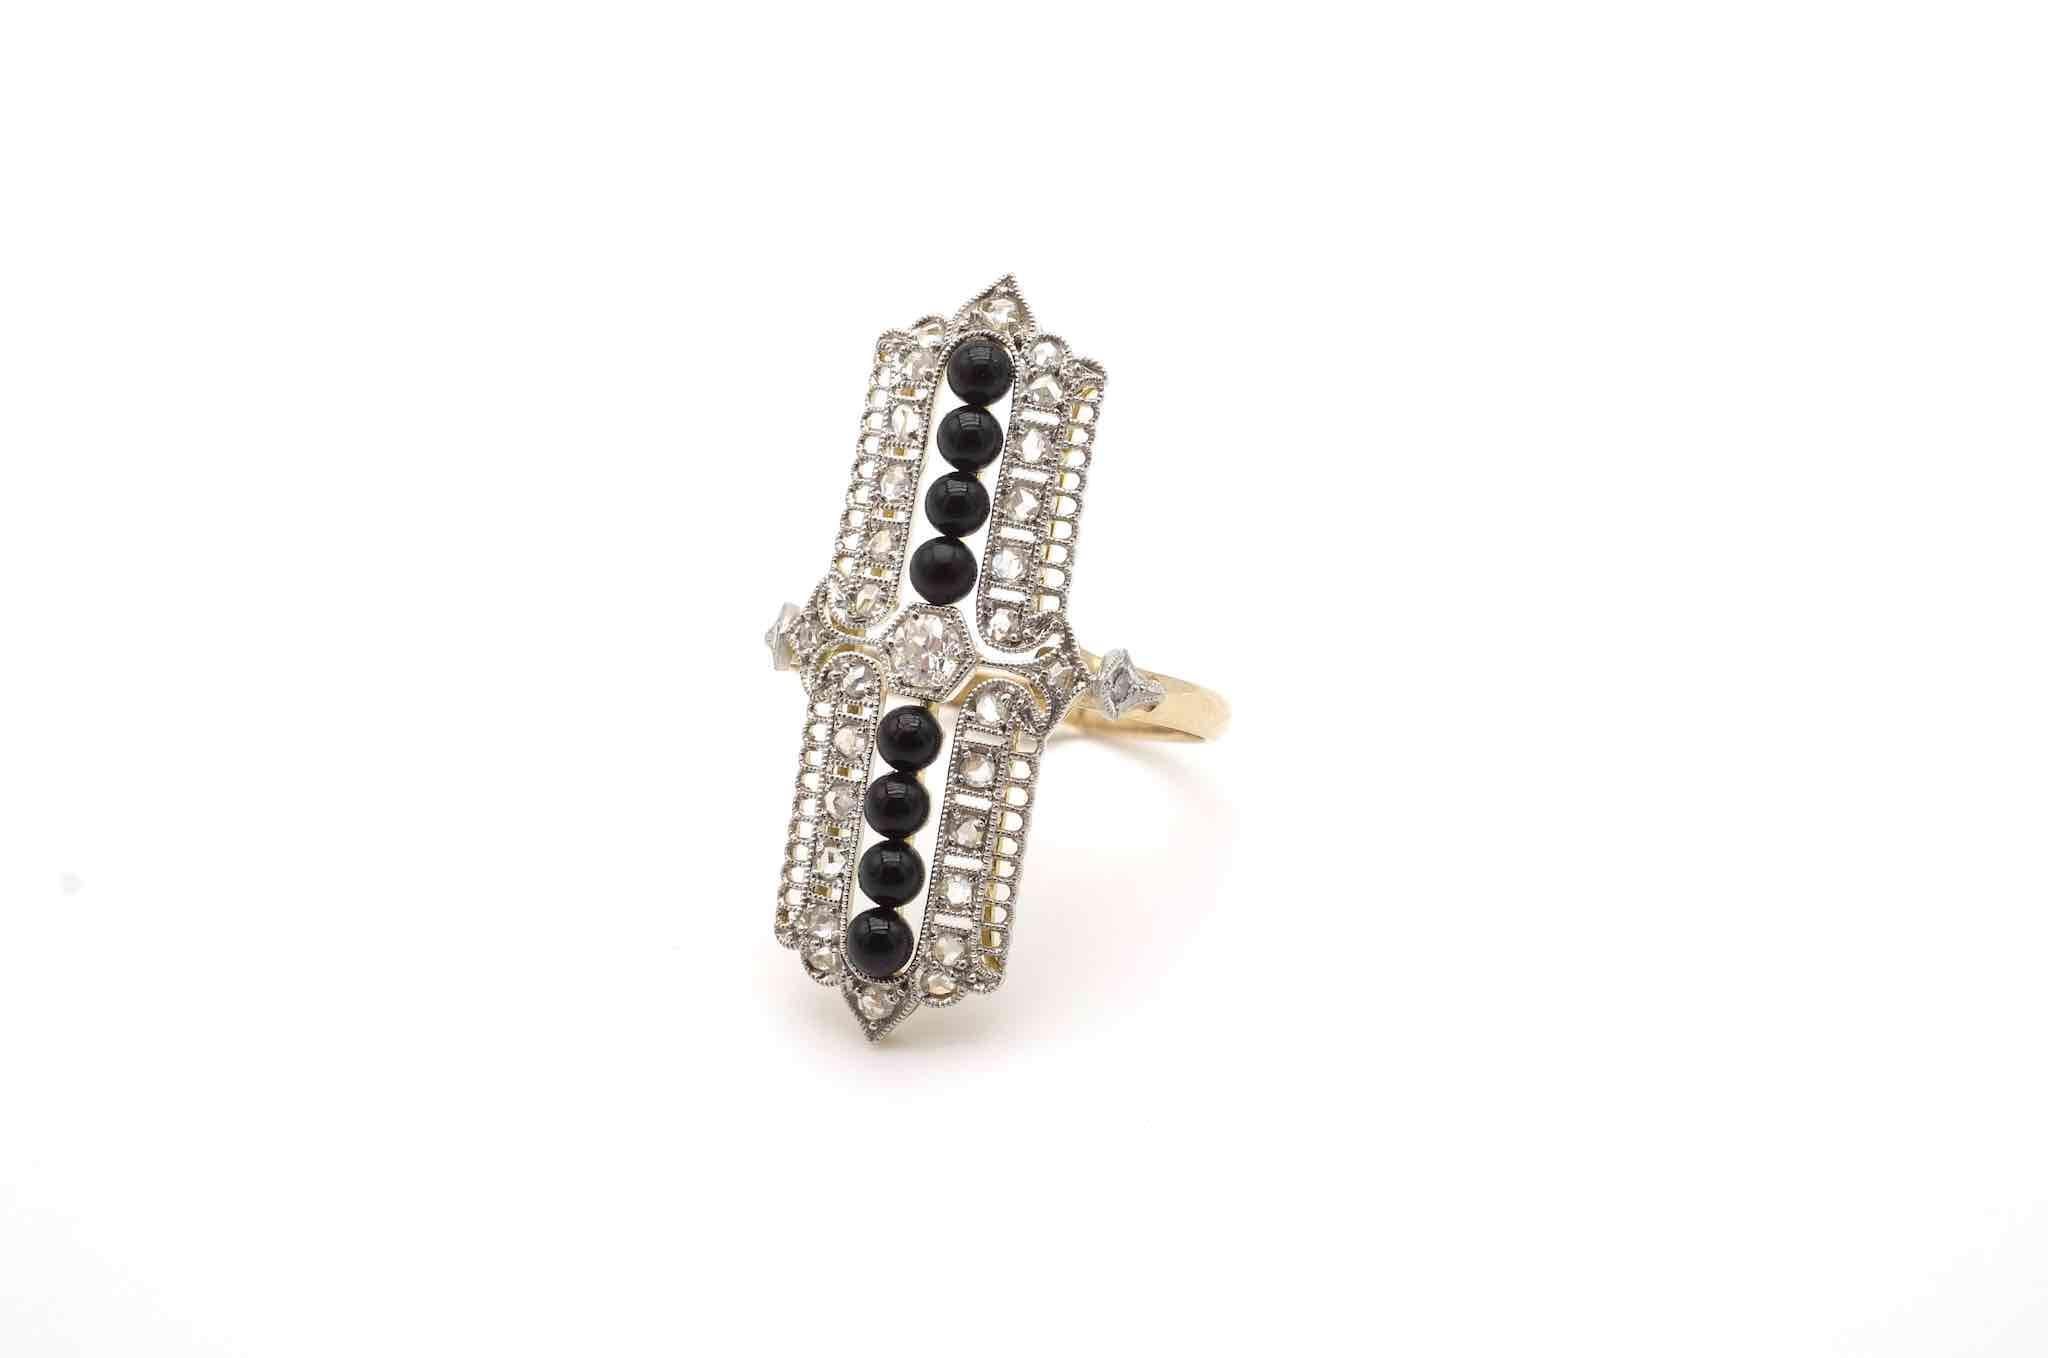 Old European Cut Art deco ring with onyx and rose cut diamonds